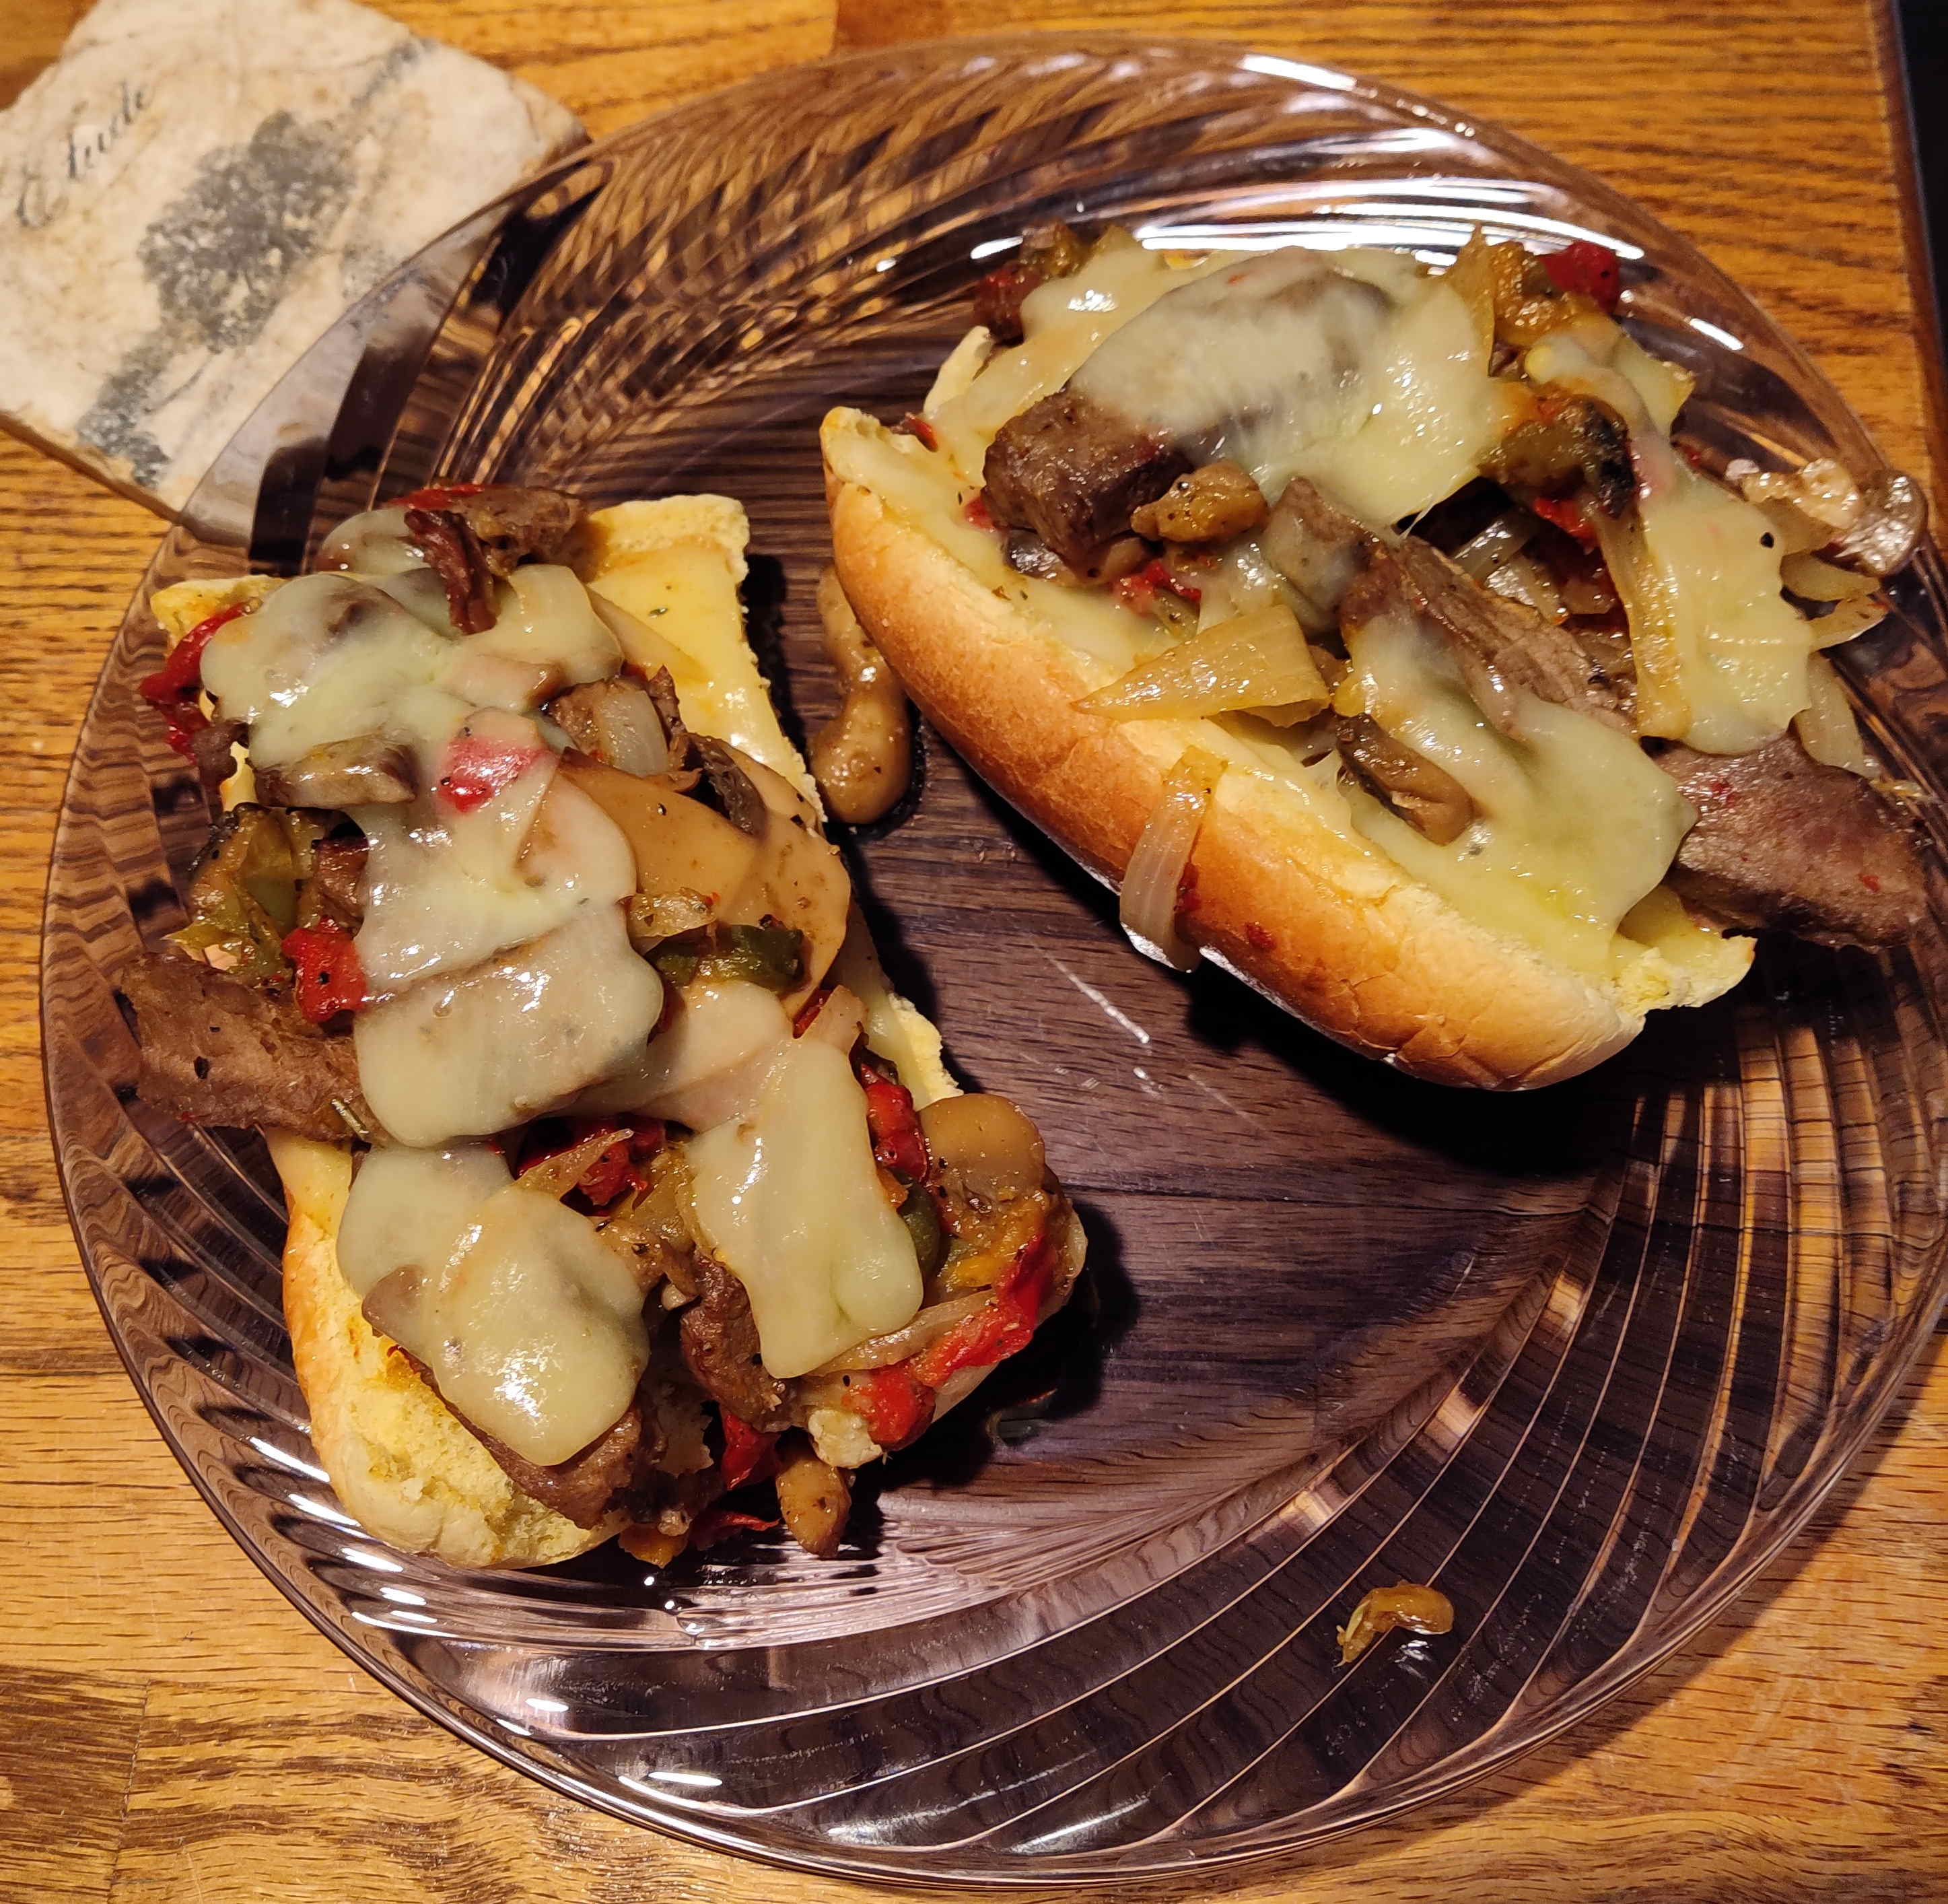 No Trip To Philly Required To Enjoy This Ridiculously Good Cheesesteak